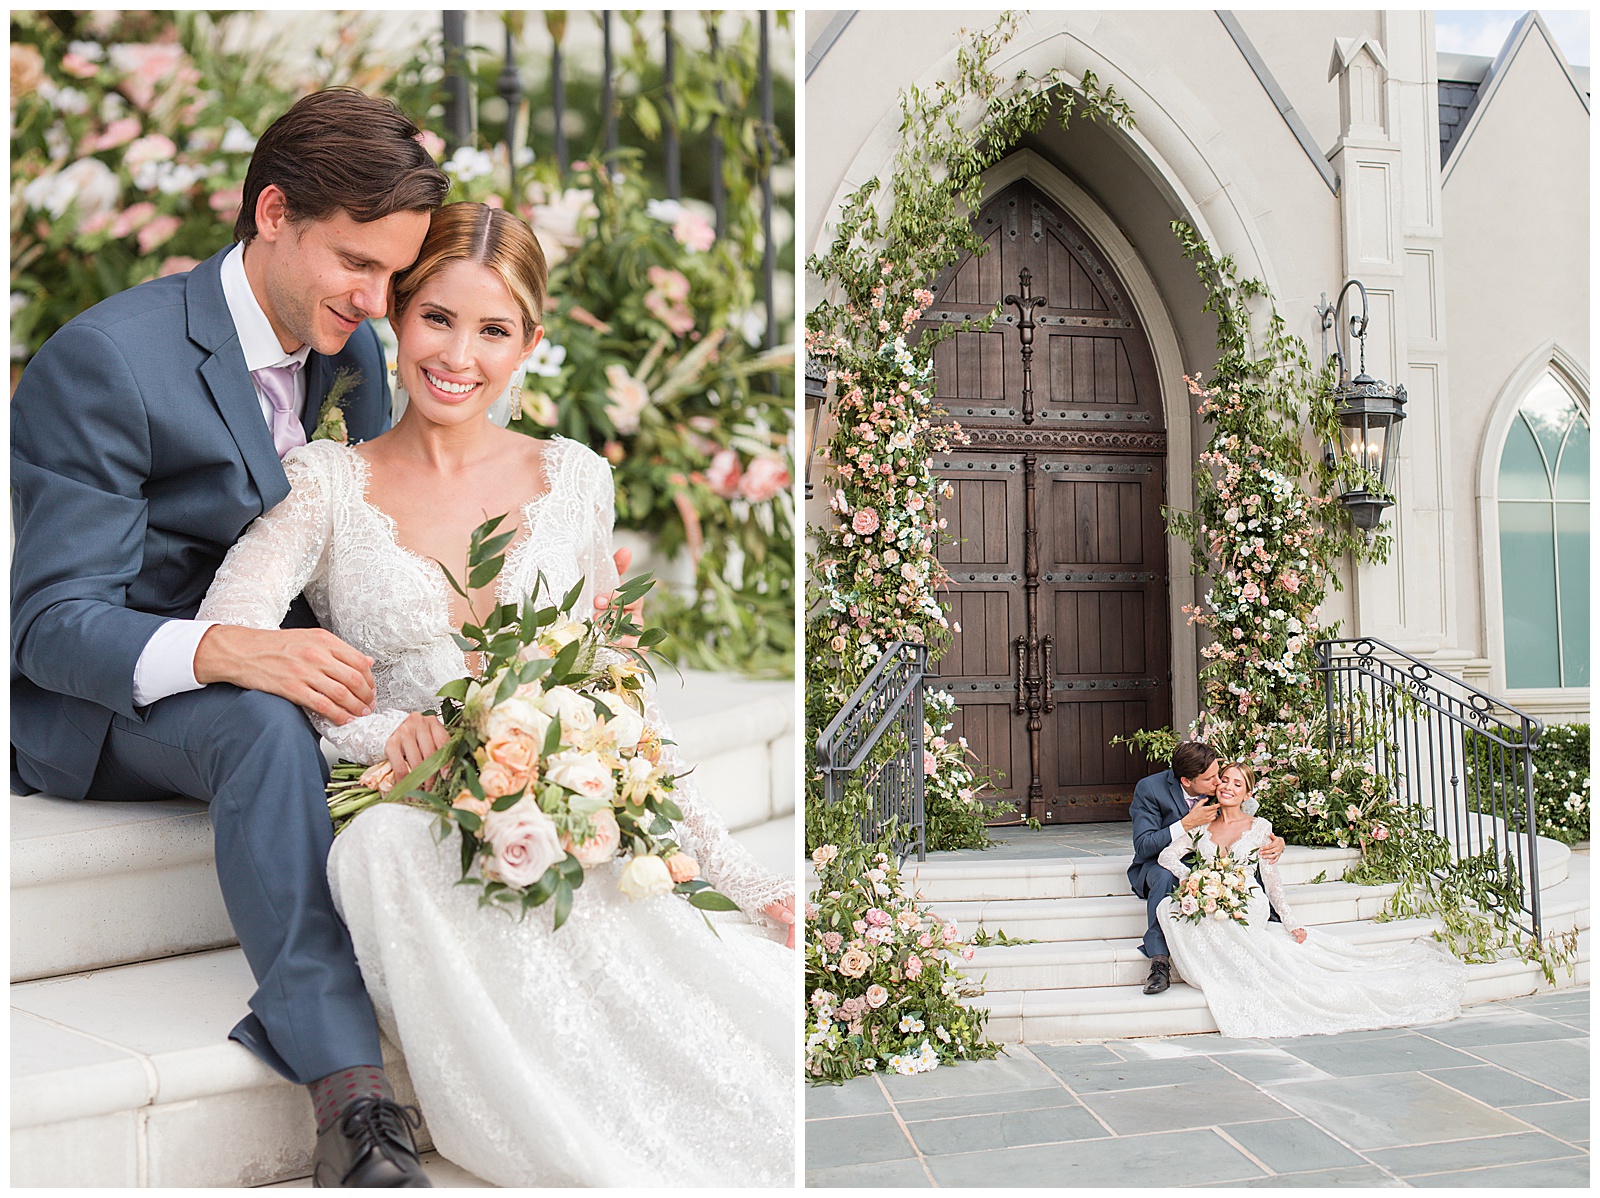 Couple sits on stairs of building surrounded by flowers at wedding 